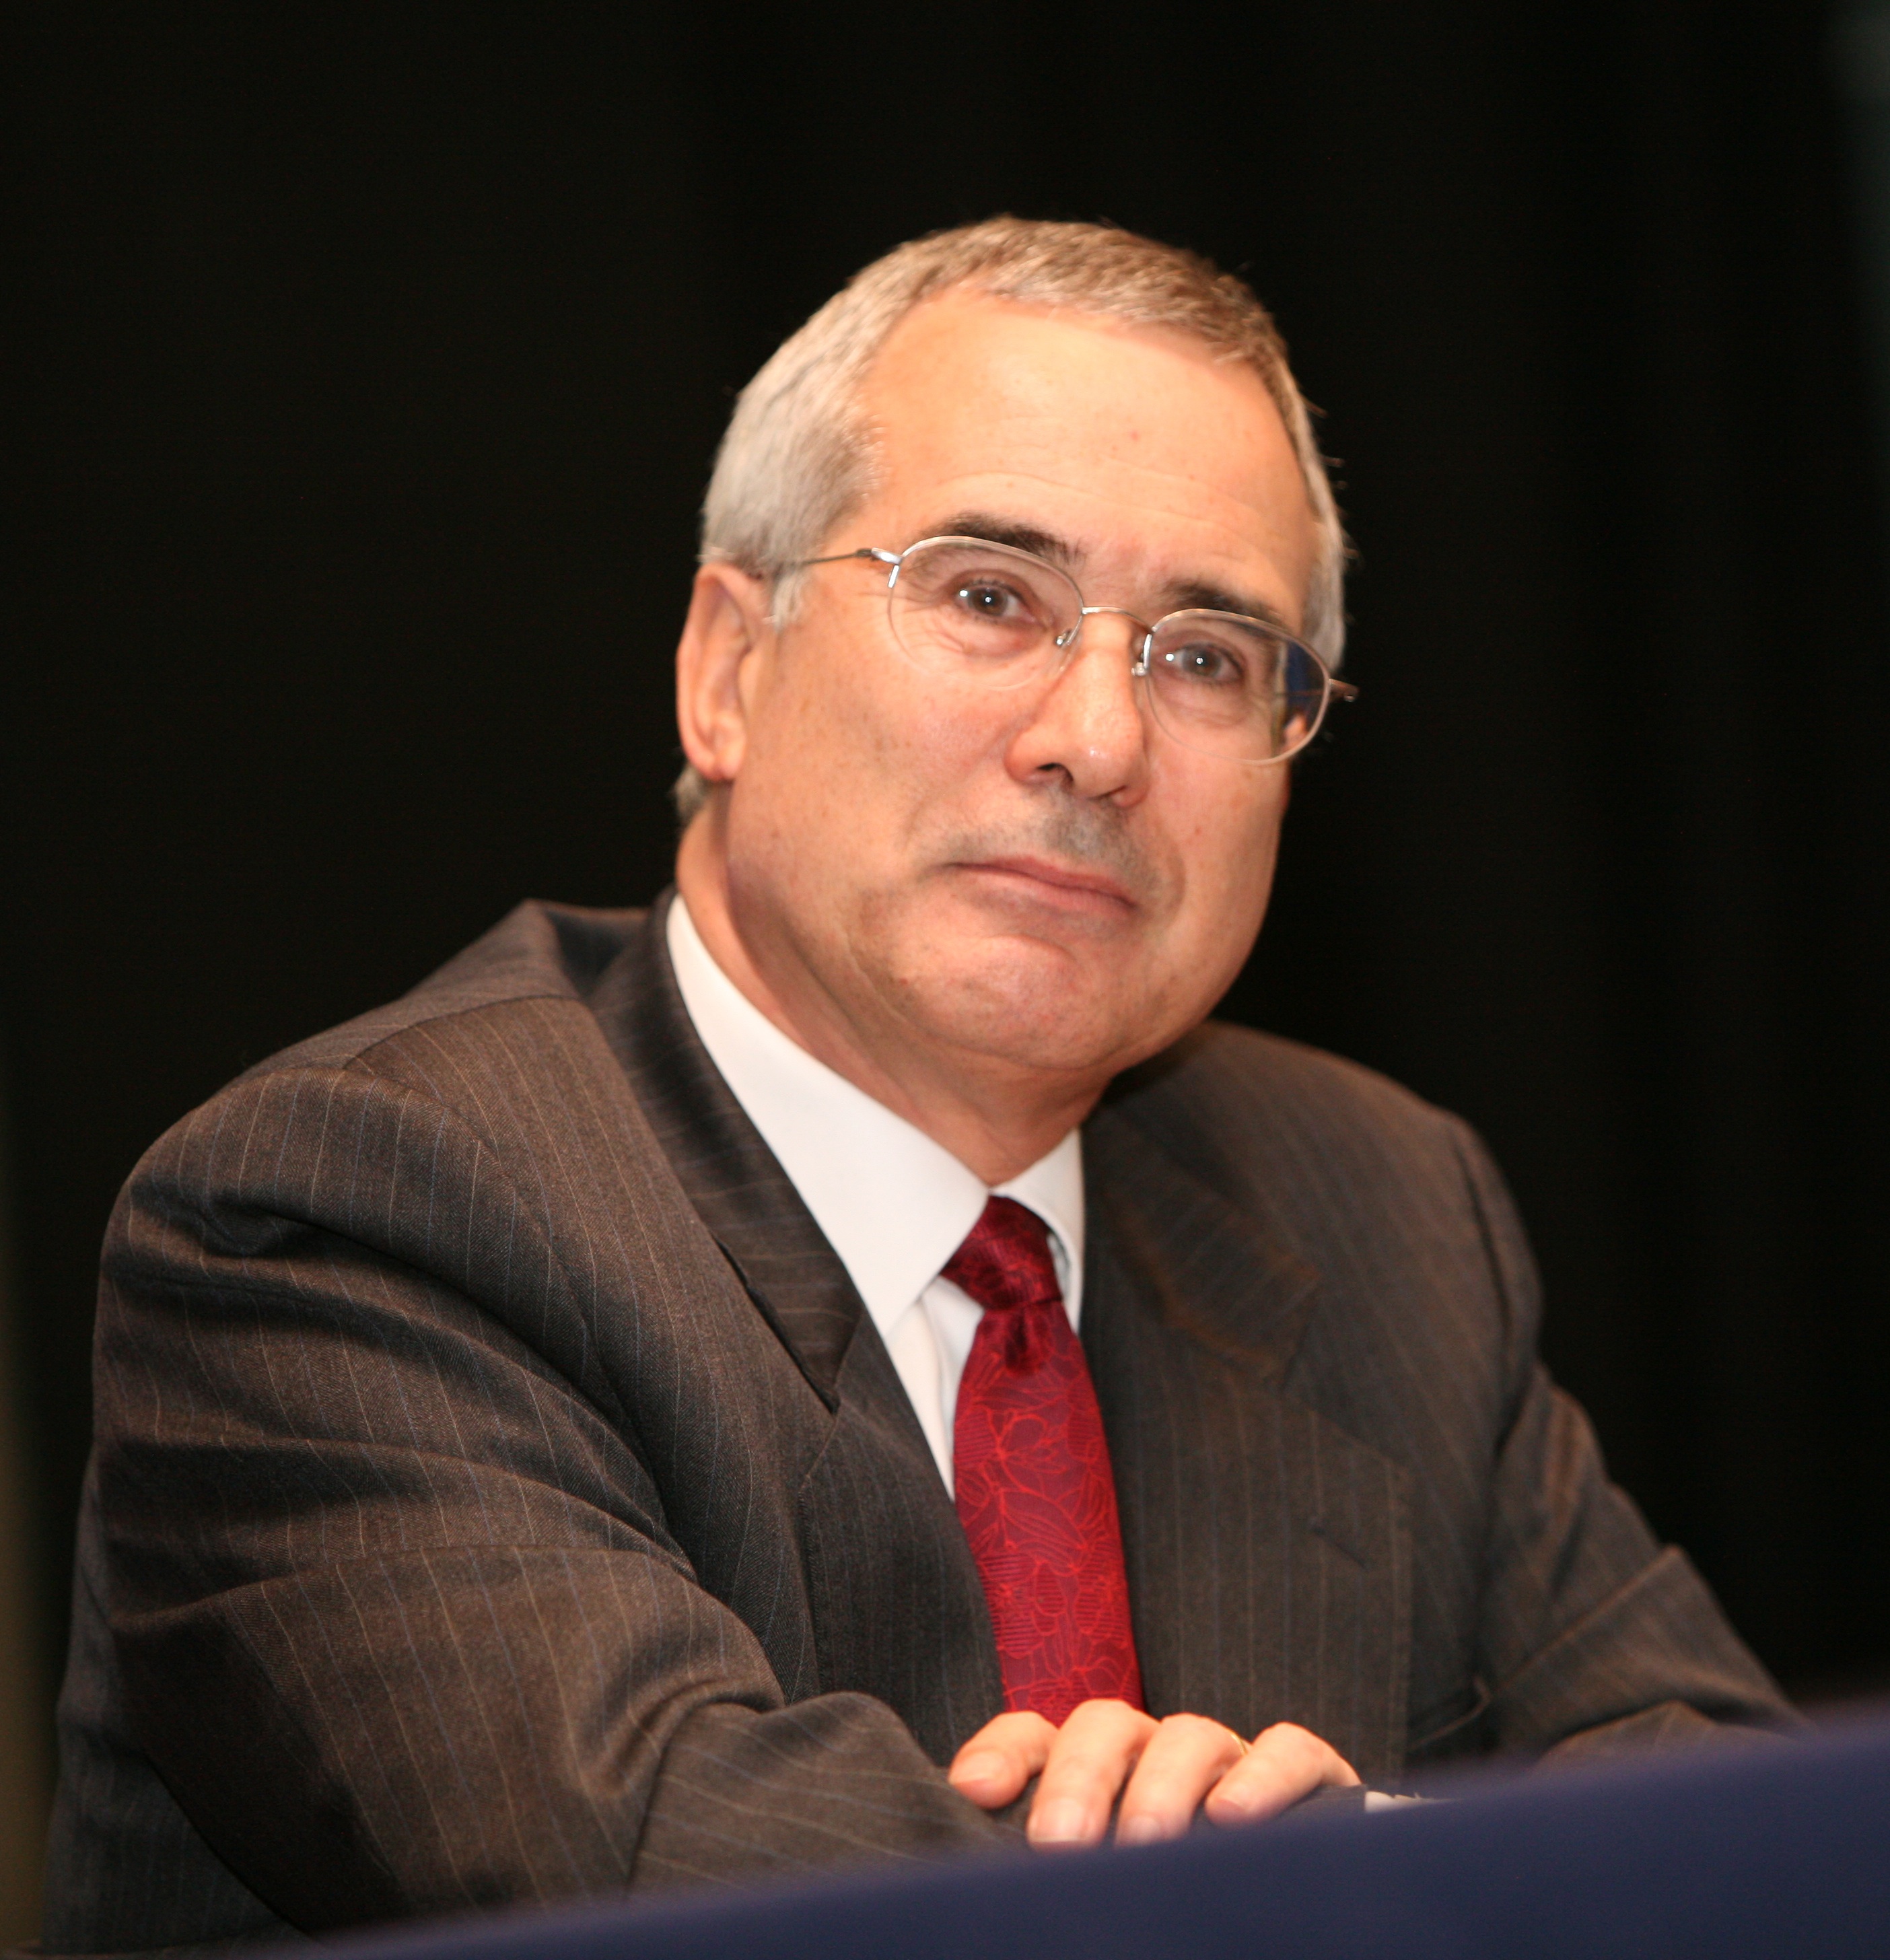 PIK congratulates Lord Stern on granting of Honorary Doctorate